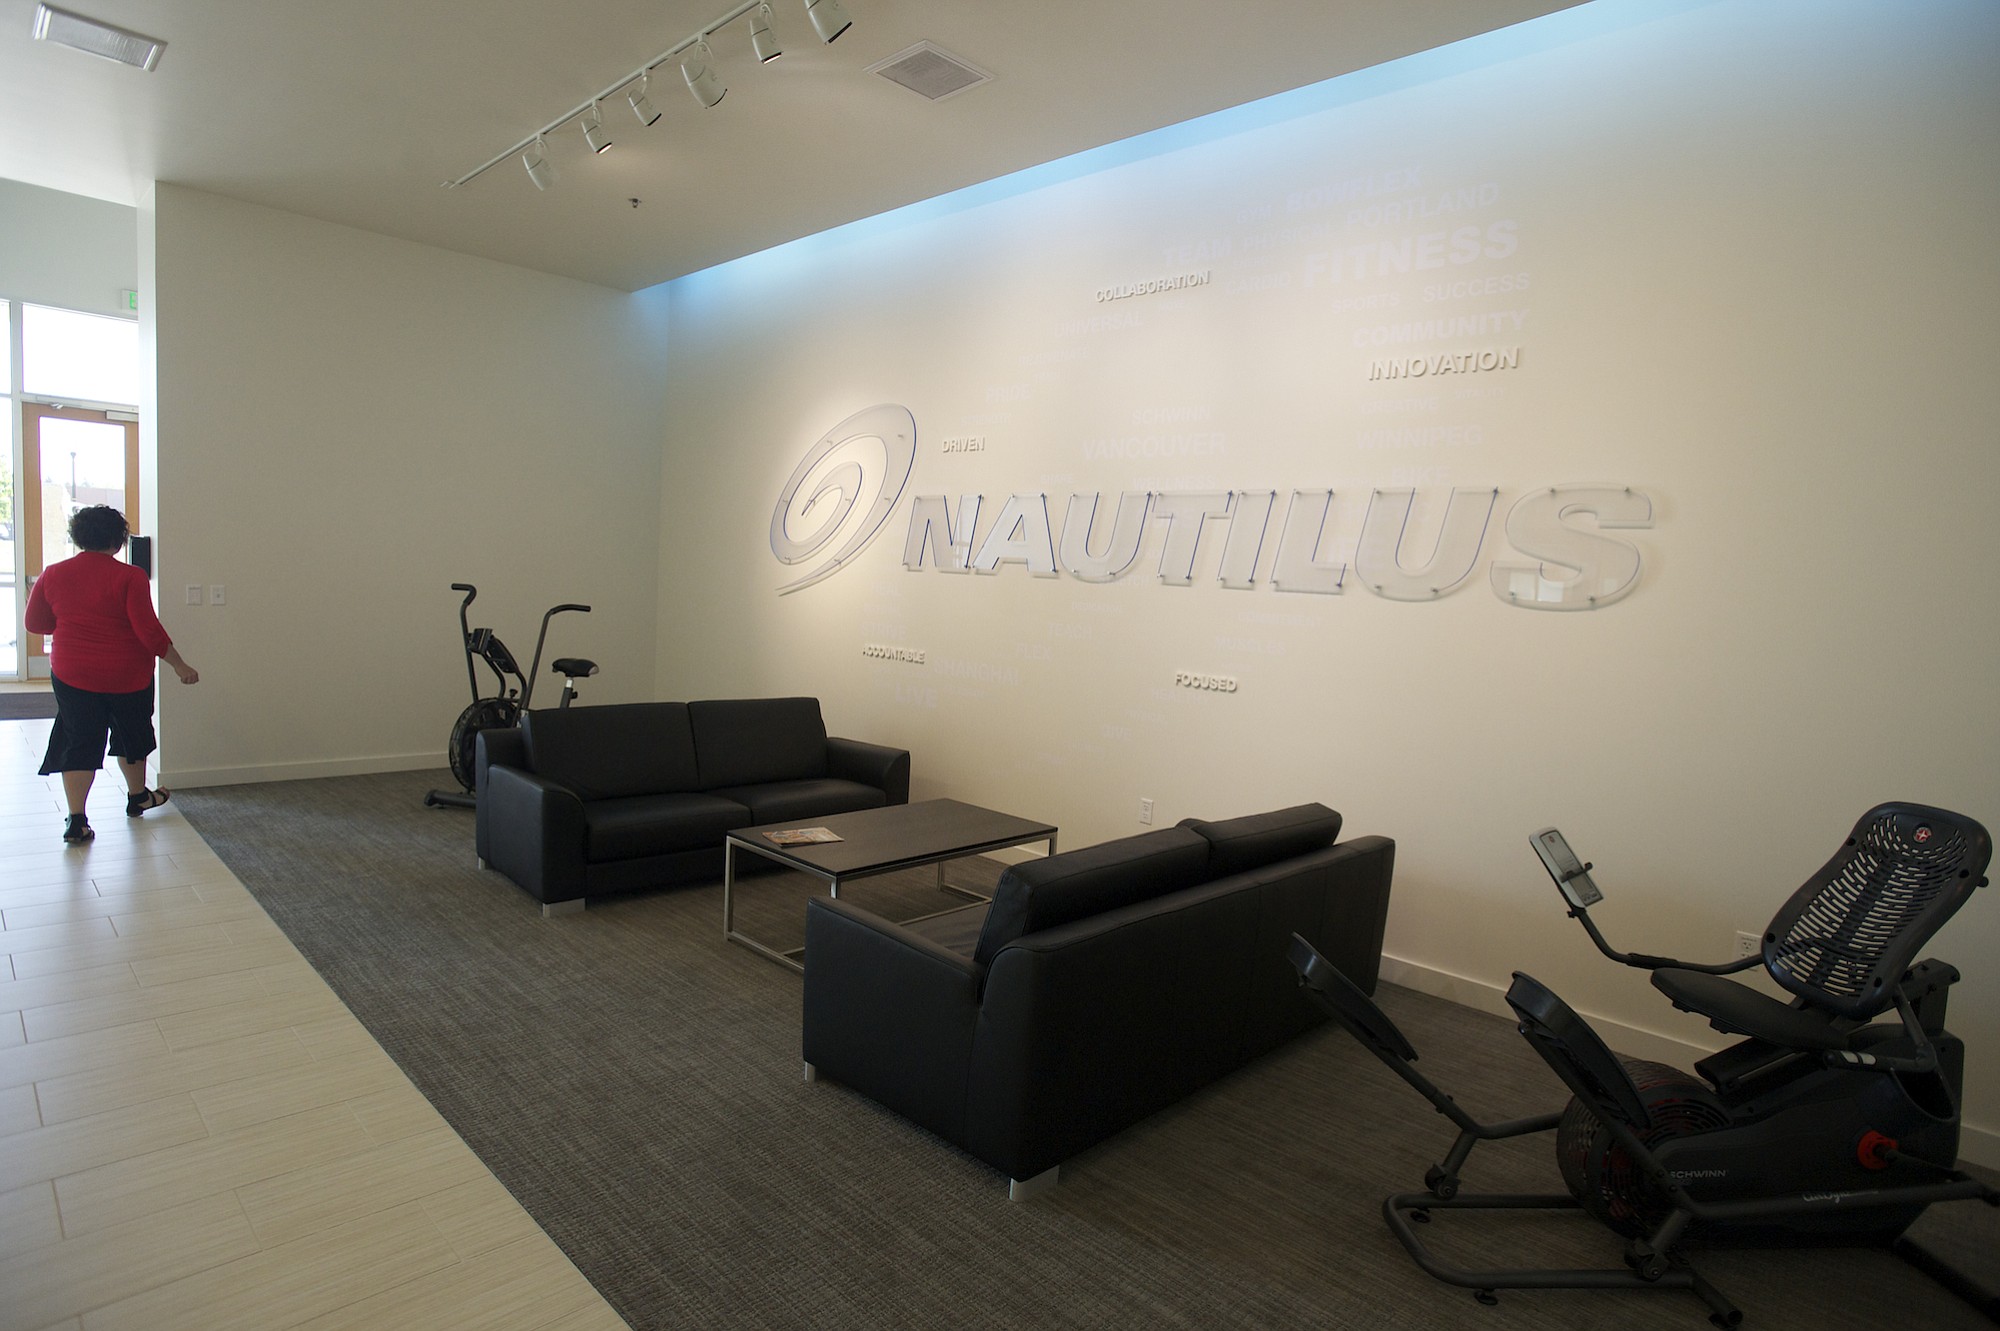 Nautilus, the Vancouver-based manufacturer of fitness machines, sells its cardio, muscle-building and other fitness machines through its direct-to-consumer channel, involving TV, social media and other advertising, and through retail stores.